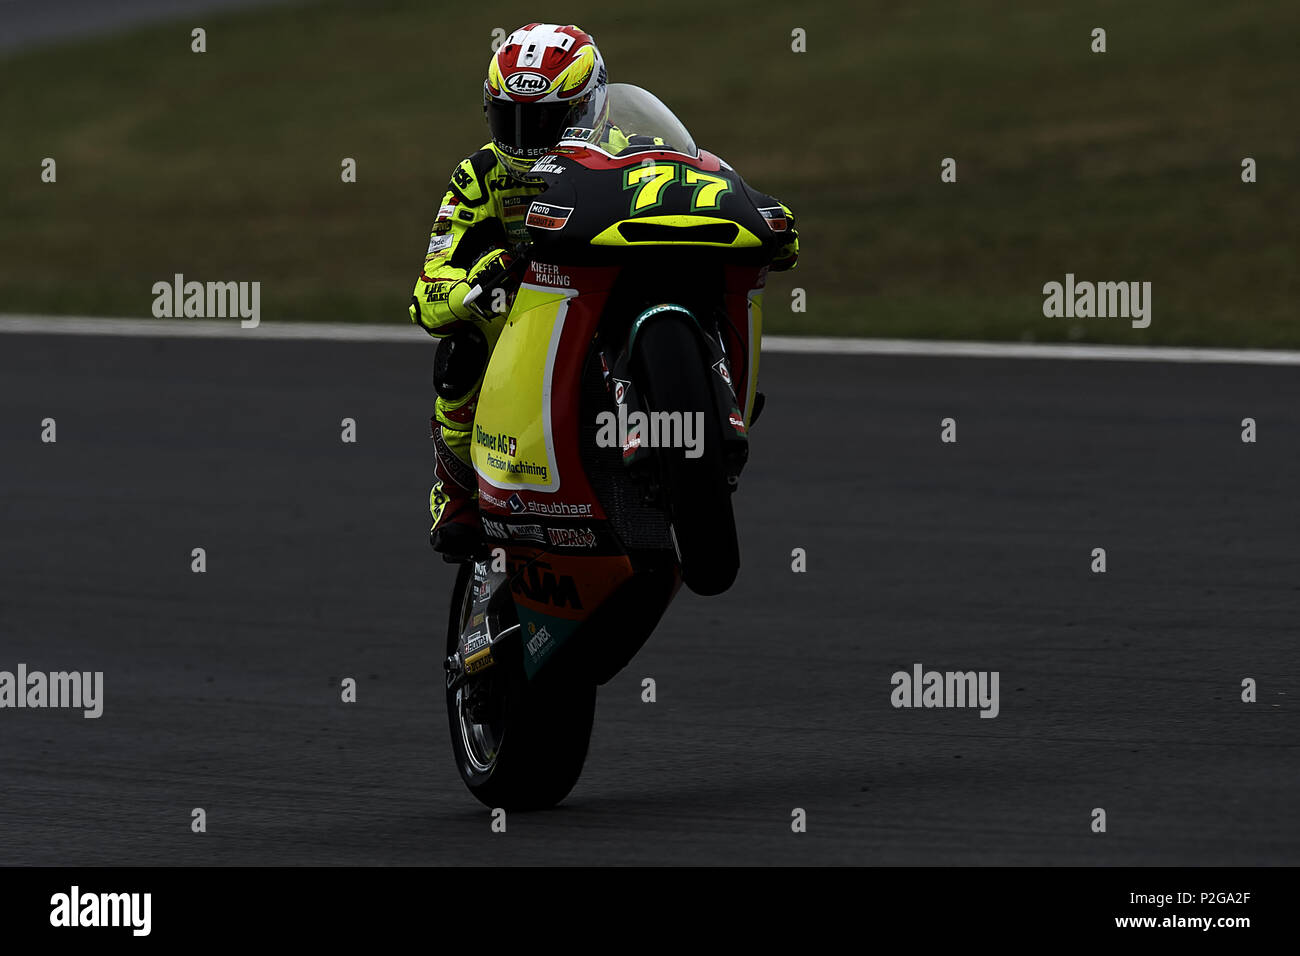 Montmelo, Spain. 15th Jun, 2018. Dominique Aegerter (77) of Switzerland and  Kiefer Racing KTMduring the free practice of the Gran Premi Monster Energy  de Catalunya, Circuit of Catalunya, Montmelo, Spain.On 15 june